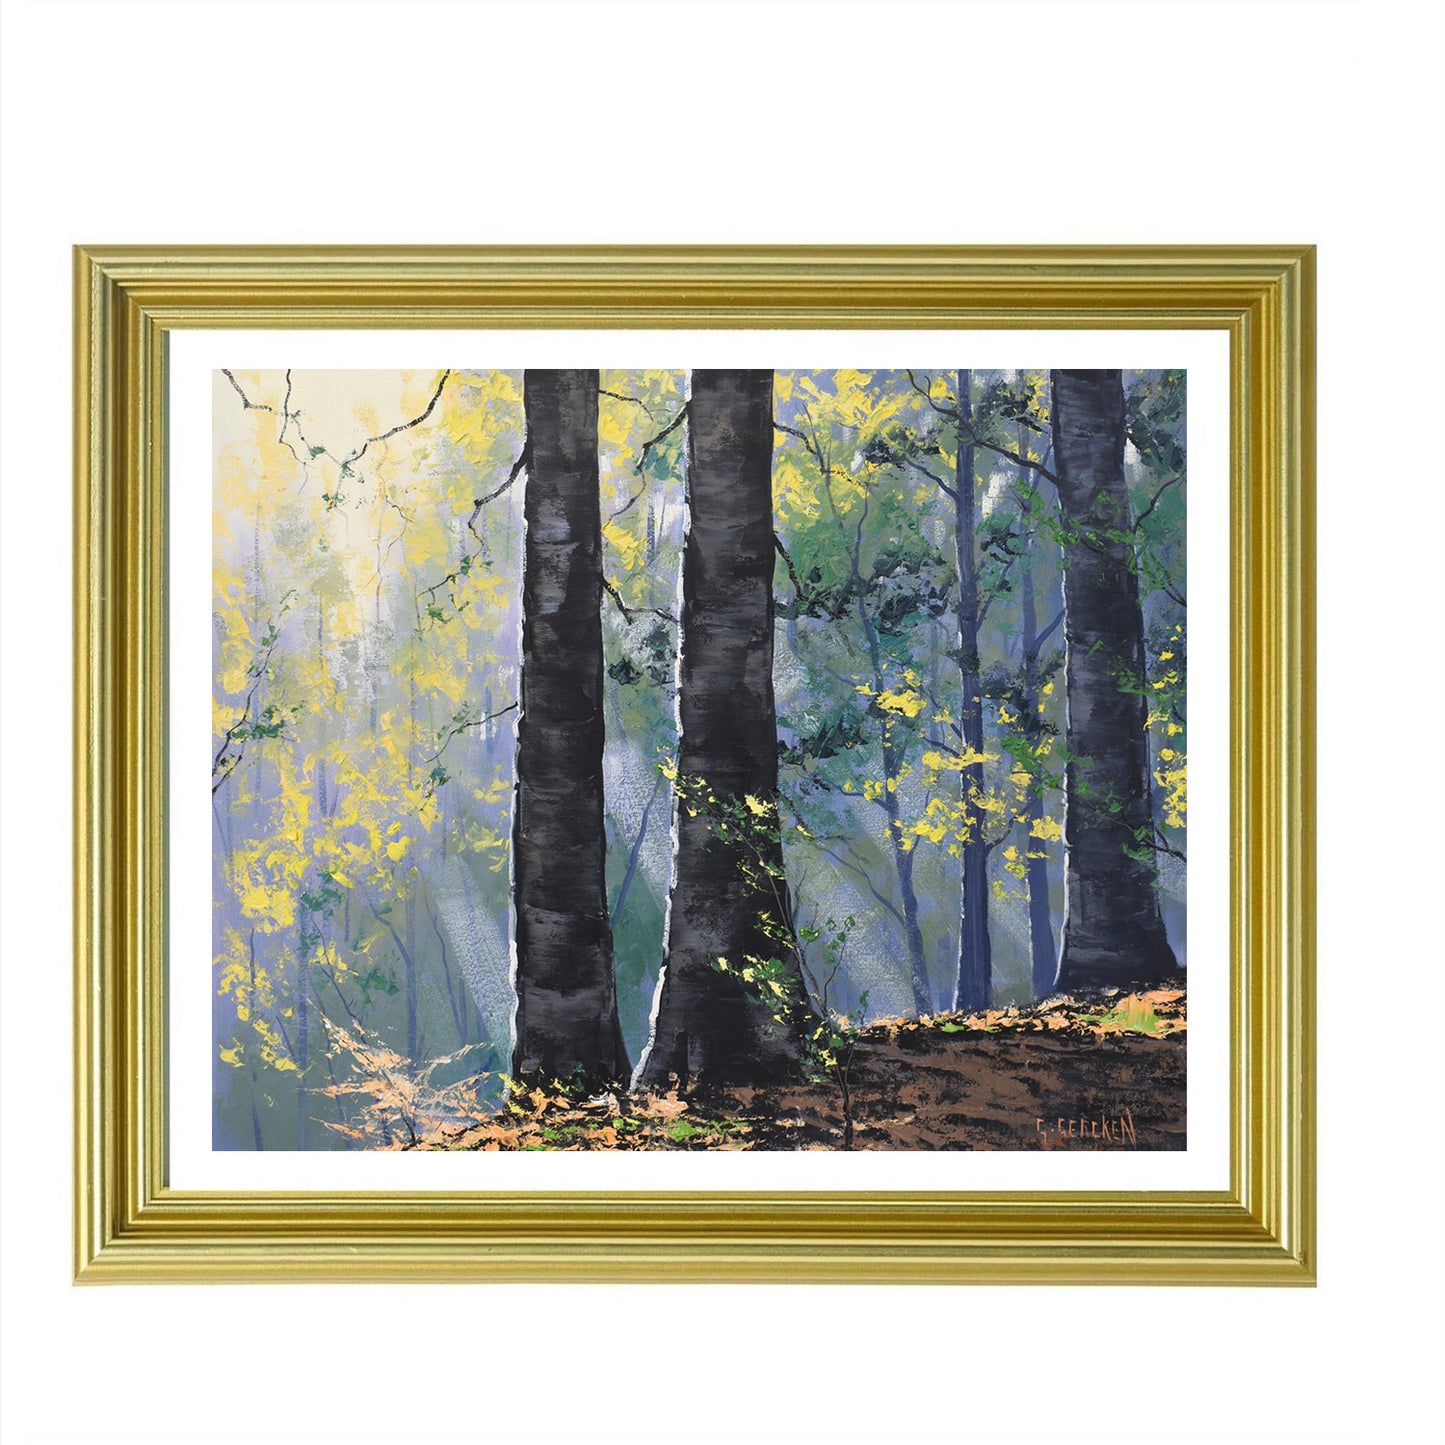 Forest trees Original Oil Painting Ready to hang By G. Gercken